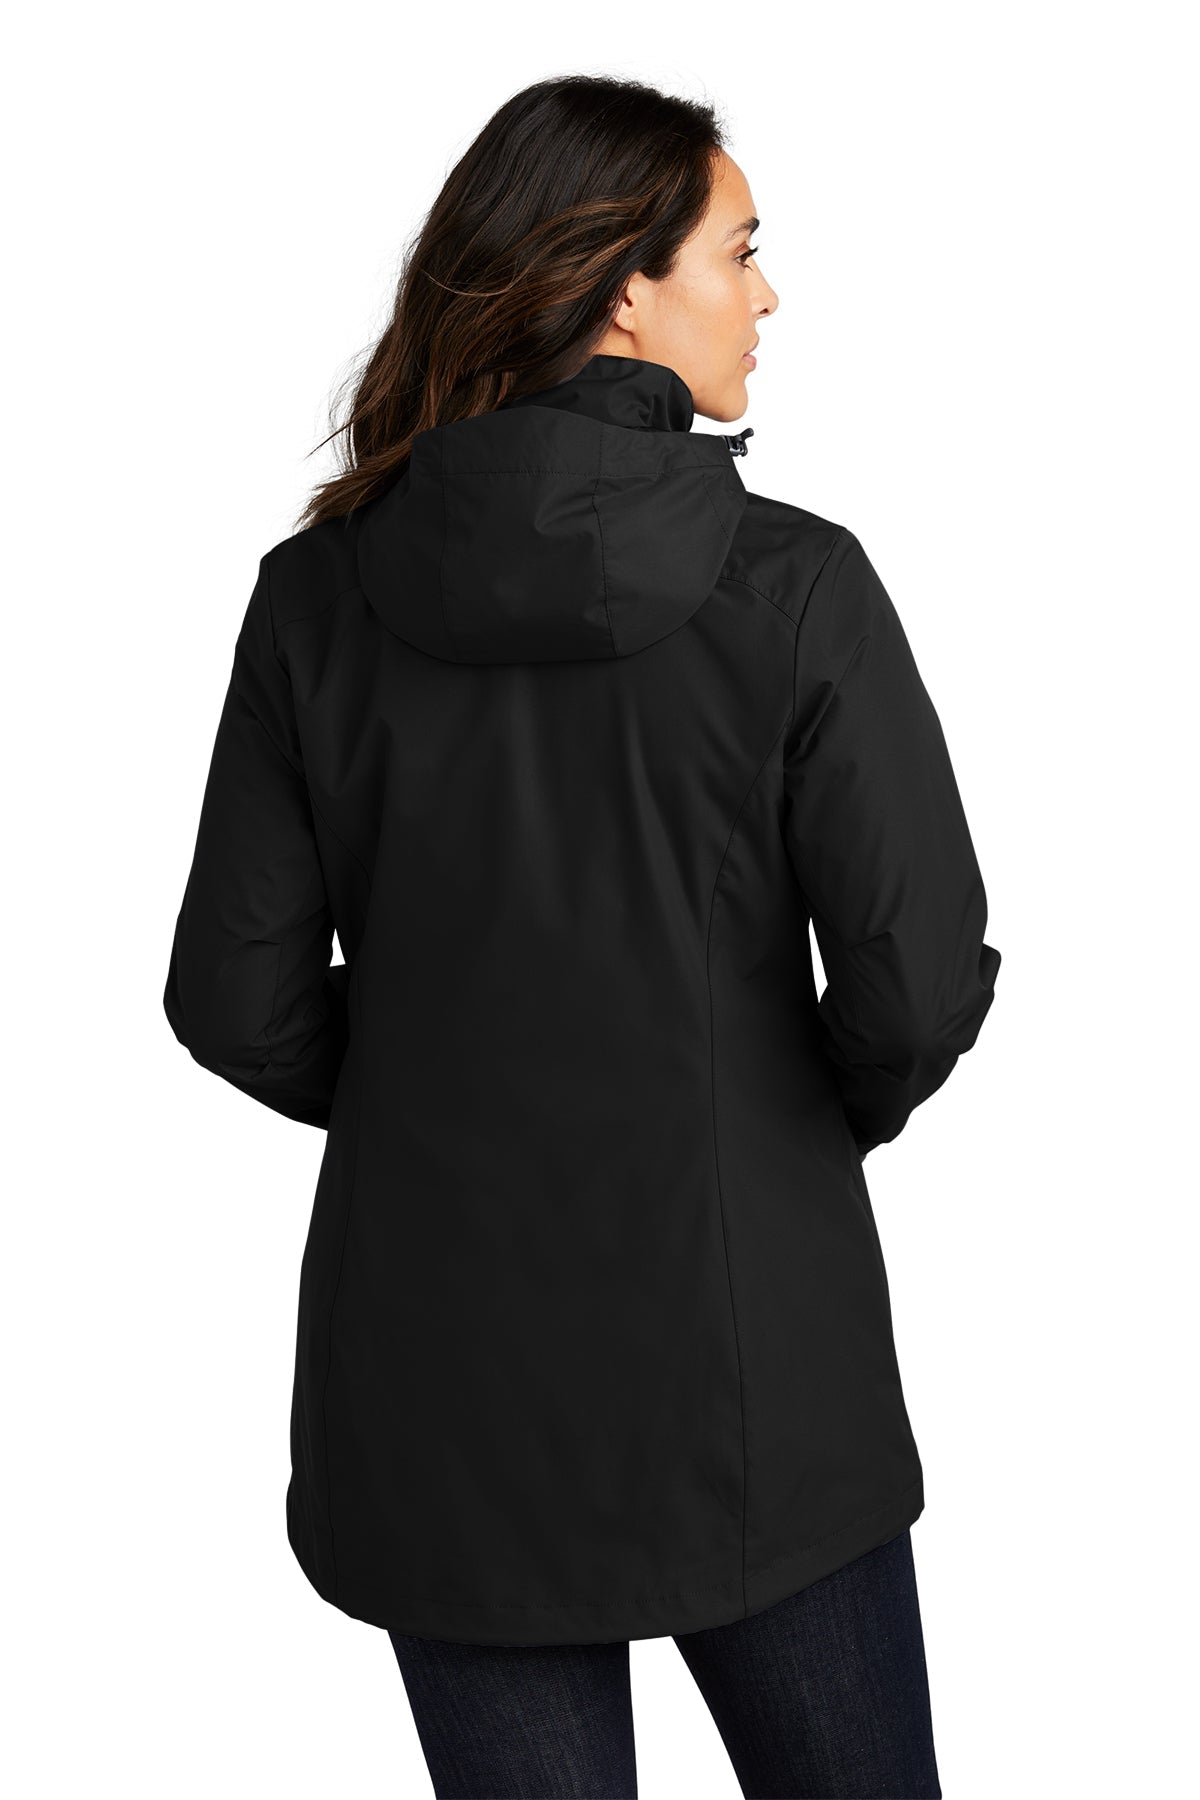 Port Authority Ladies All-Weather 3-in-1 Branded Jackets, Black